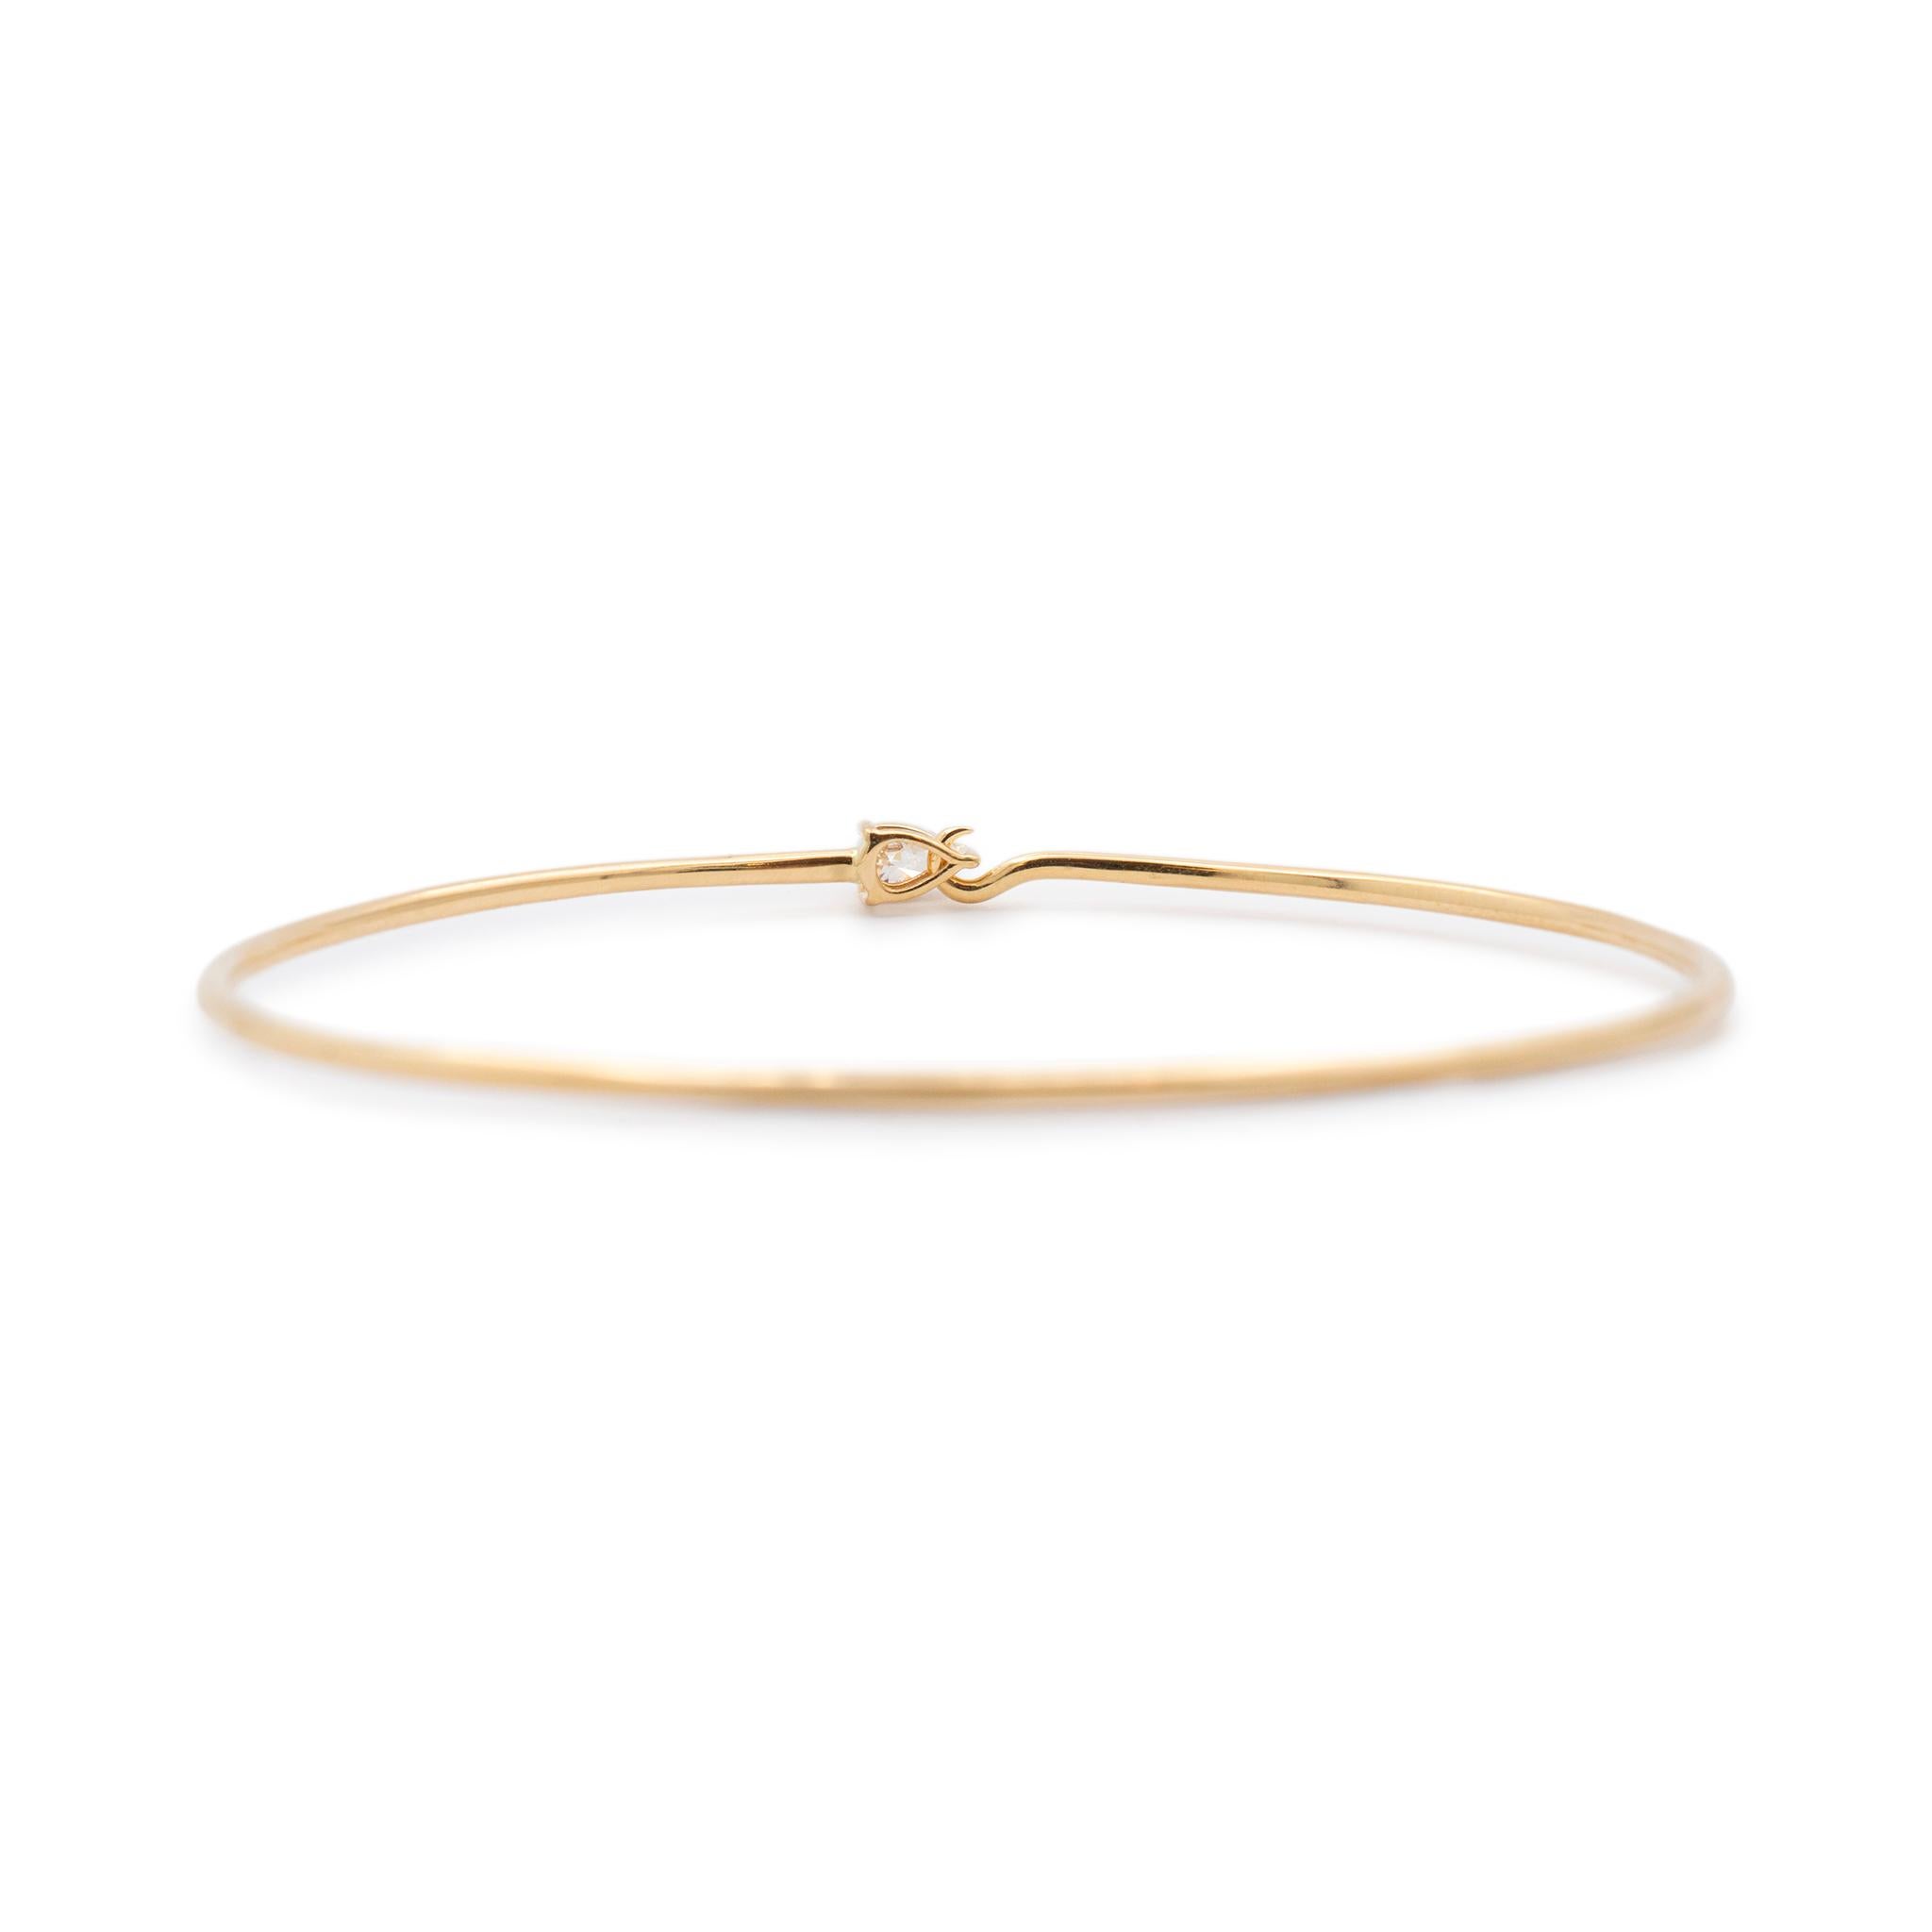 Gender: Ladies

Metal Type: 14K Yellow Gold

Length: 5.50 inches

Width: 1.45 mm

Weight: 3.82 grams

Ladies 14K yellow gold diamond bangle bracelet. The metal was tested and determined to be 14K yellow gold. Engraved with 